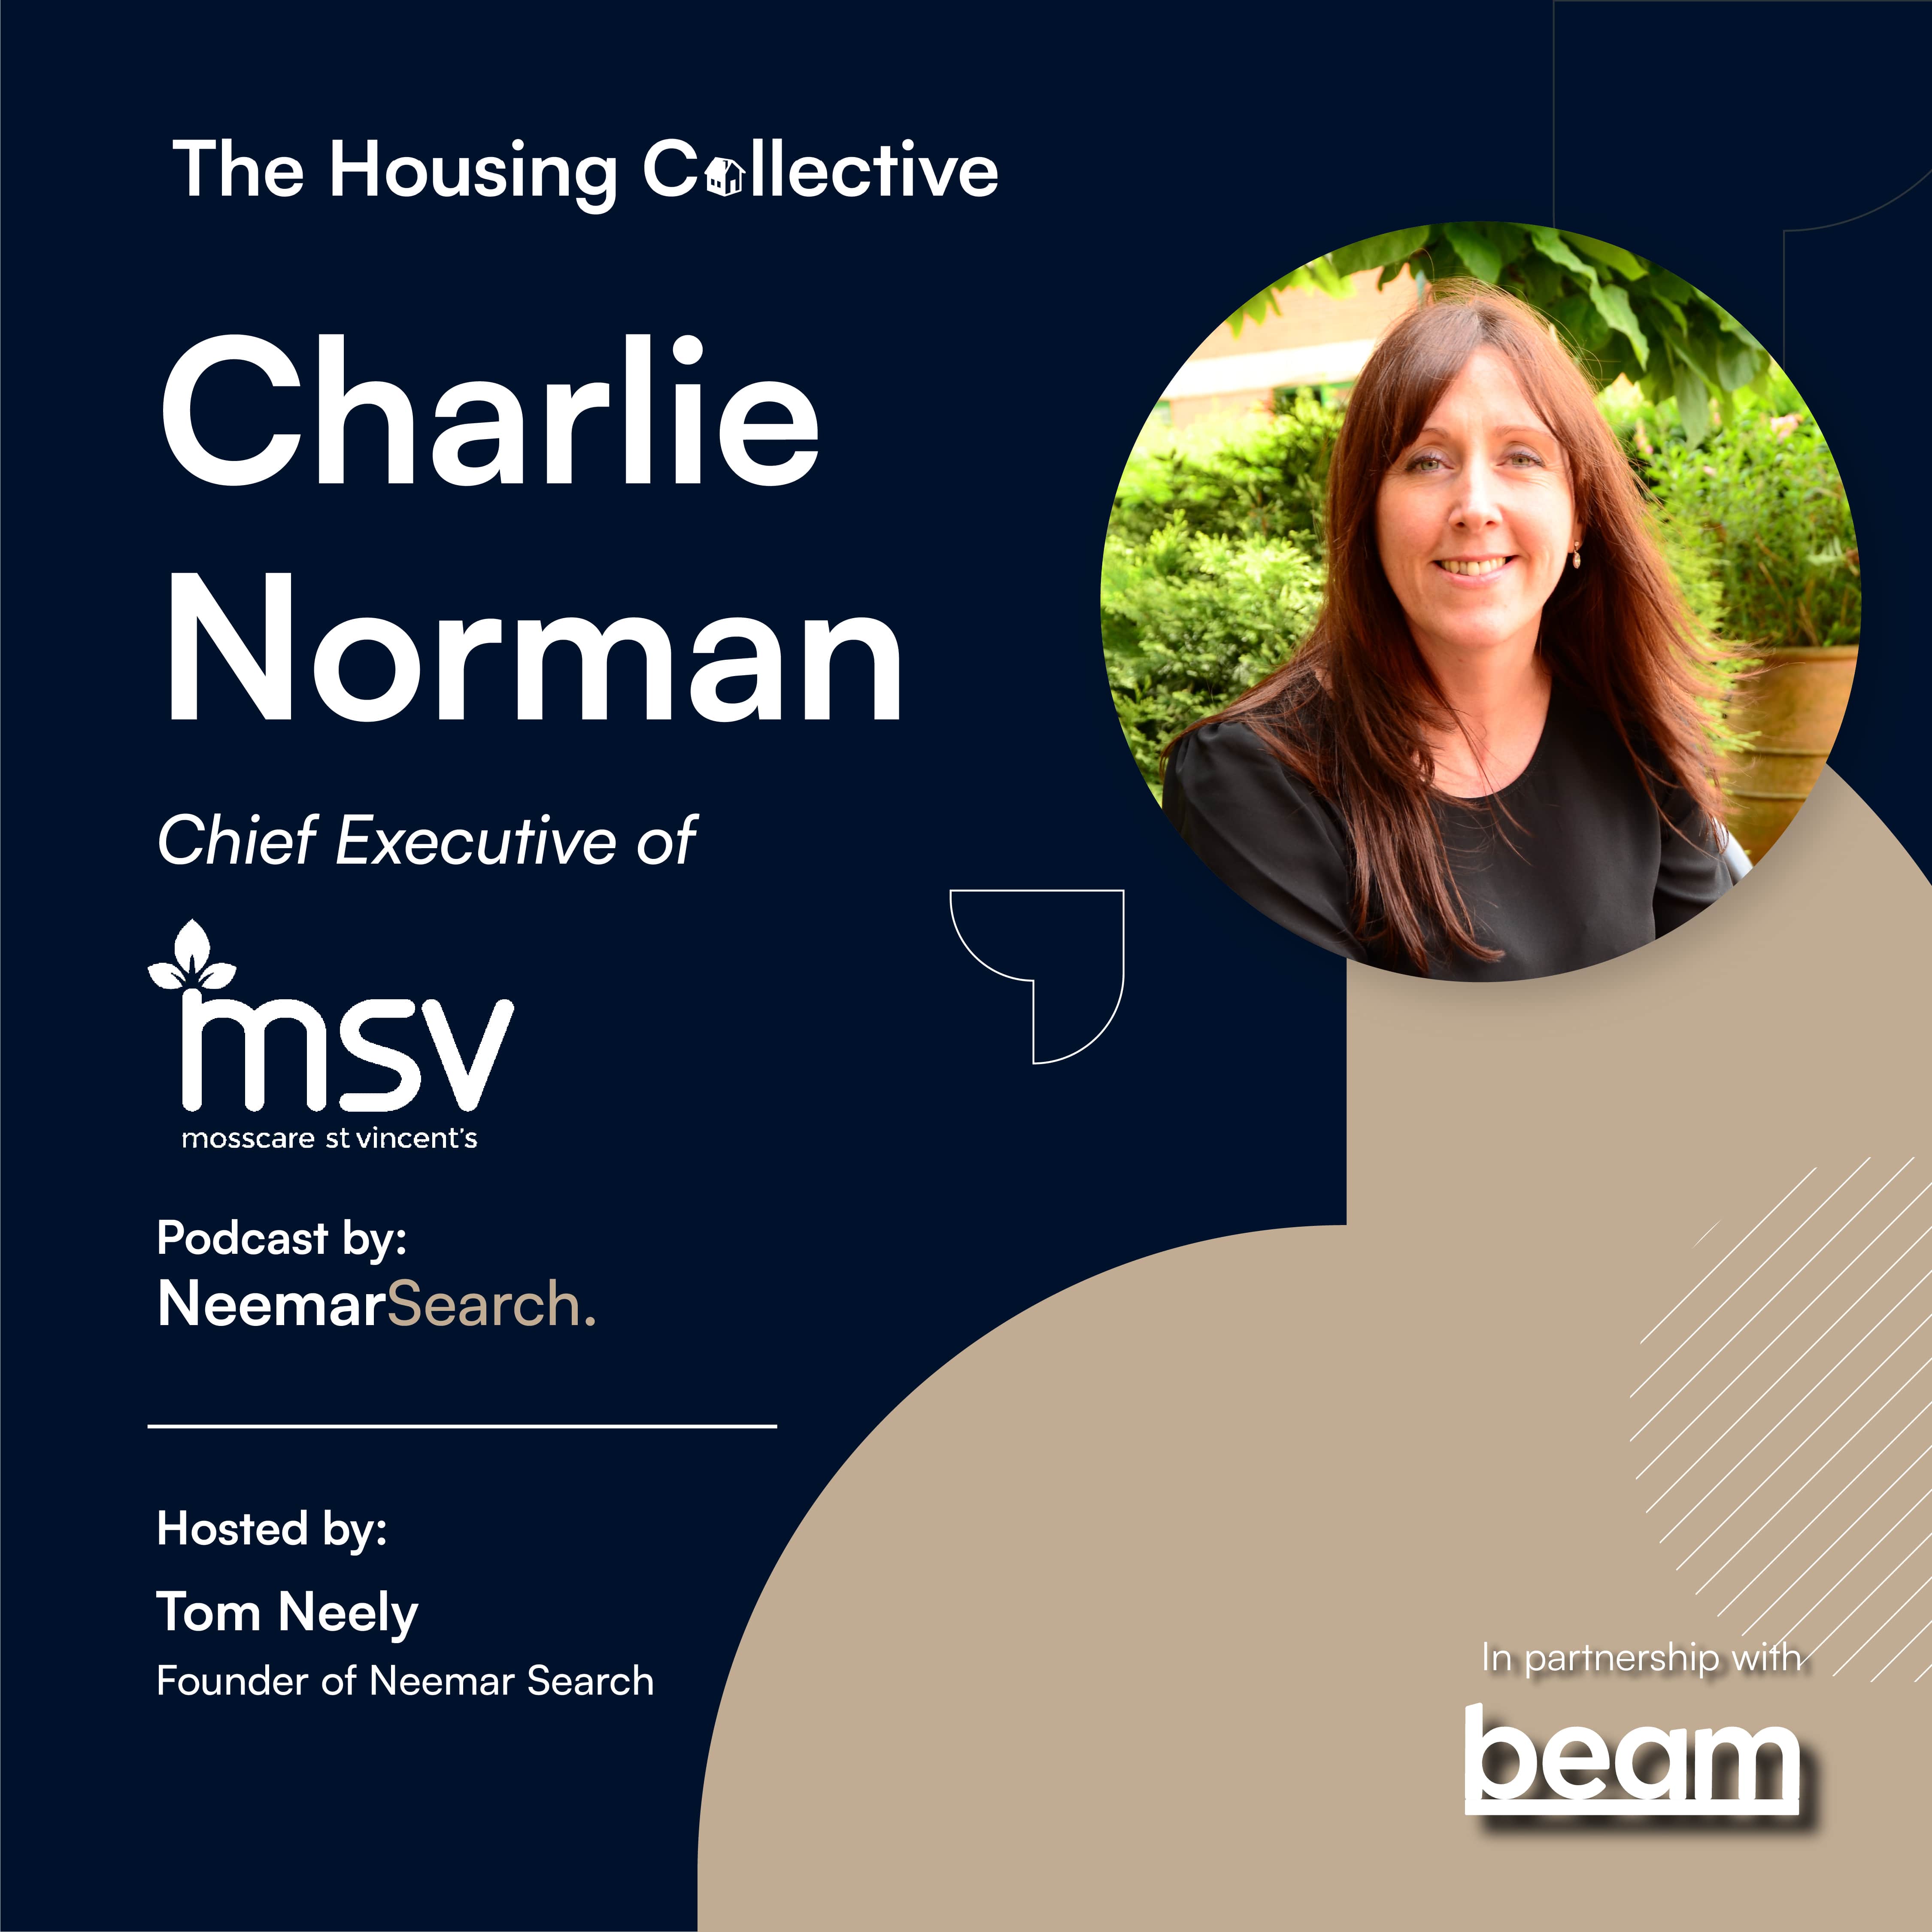 The Housing Collective: Assembling an Empowering Executive Team